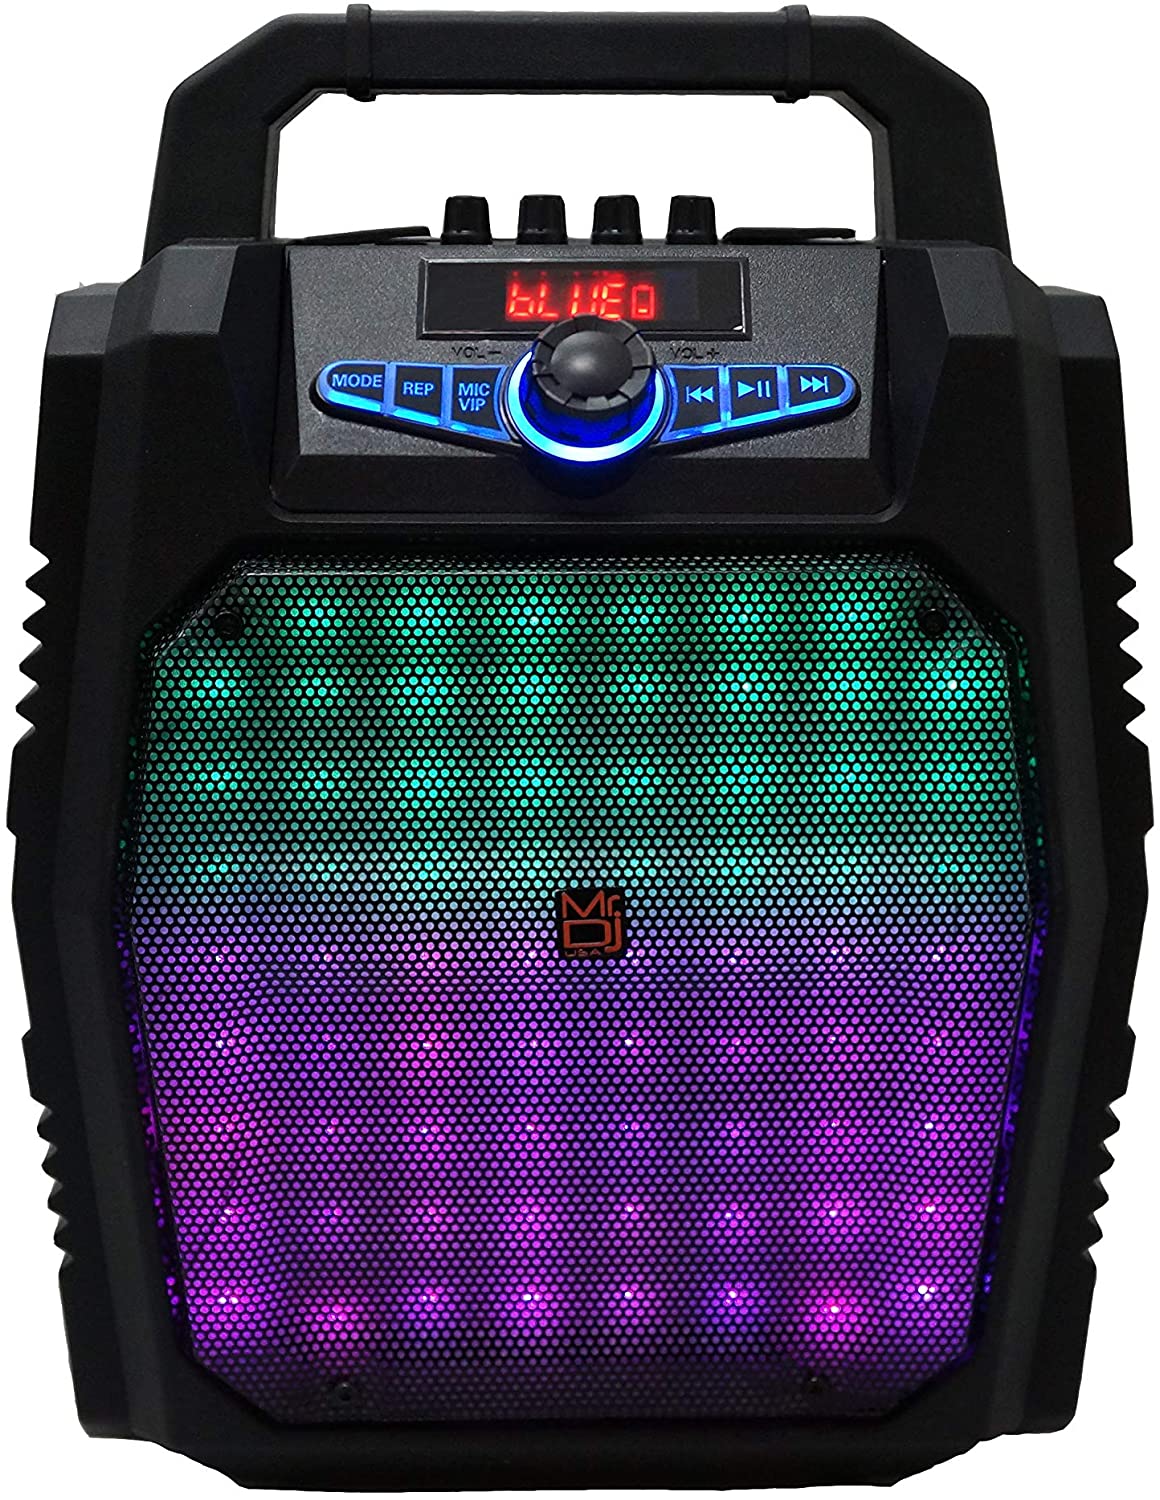 Mr. Dj PartyRock Bluetooth Speaker<br/>(Party Rock) 8" Portable Powerful PA Bluetooth Speaker Karaoke Machine with Sound Activated Lights, Battery Powered, FM Radio, USB/Micro SD Card, & LED Party Light Perfect for Party